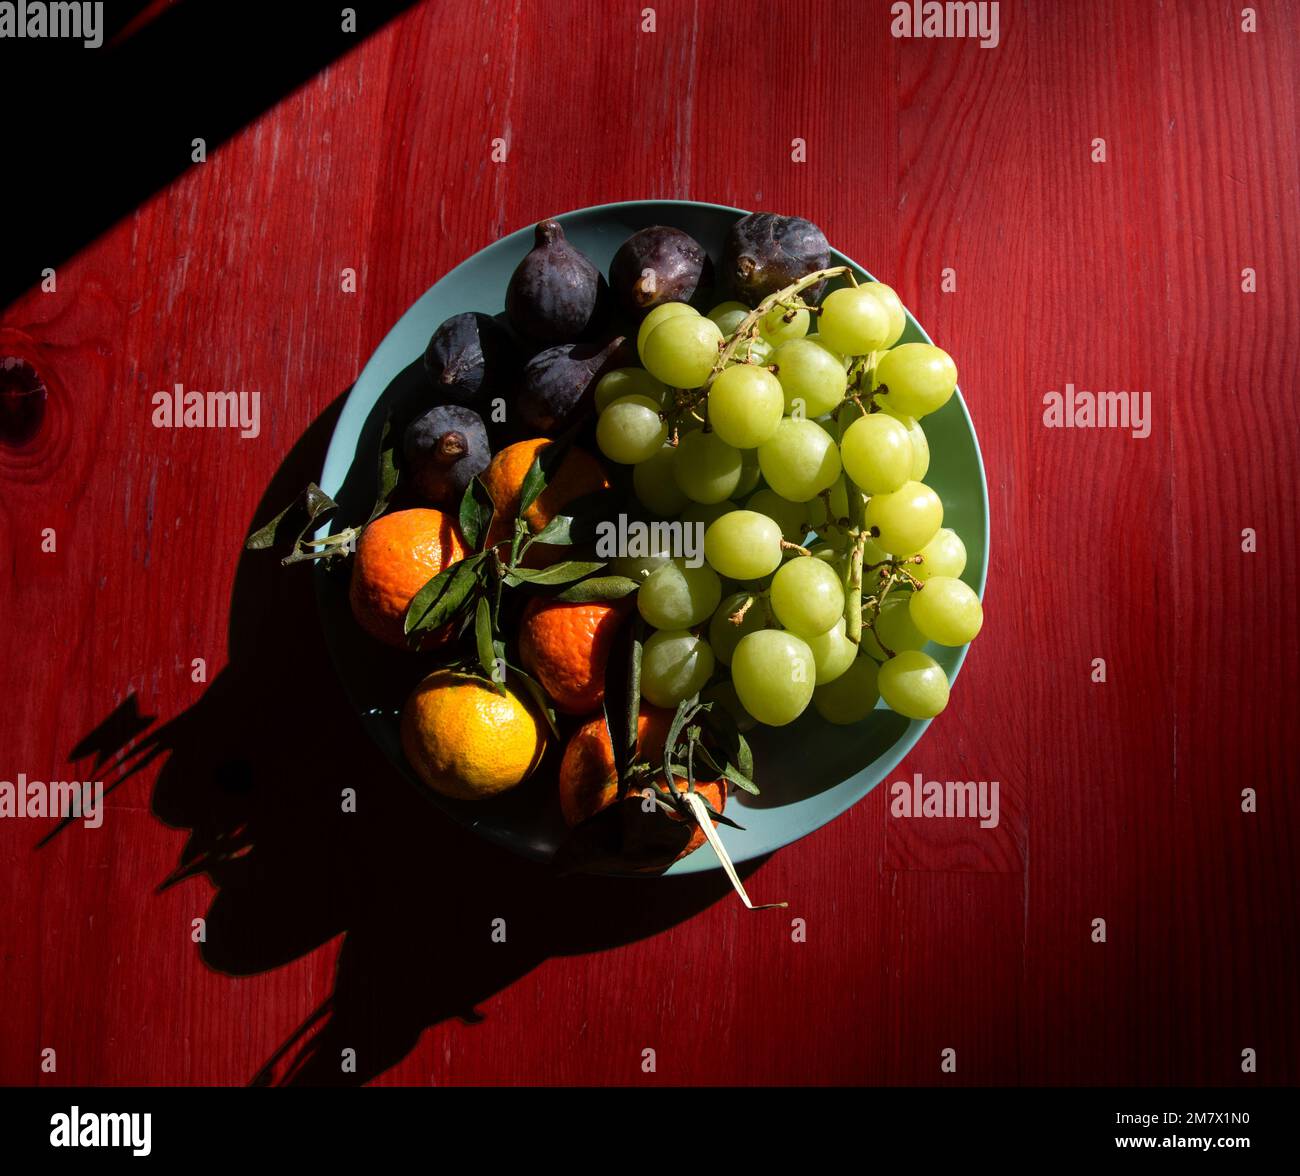 Different organic fruits on plate on vintage wooden surface. Game of light and shadows. Mystery meal. Seasonal fruit background. Stock Photo